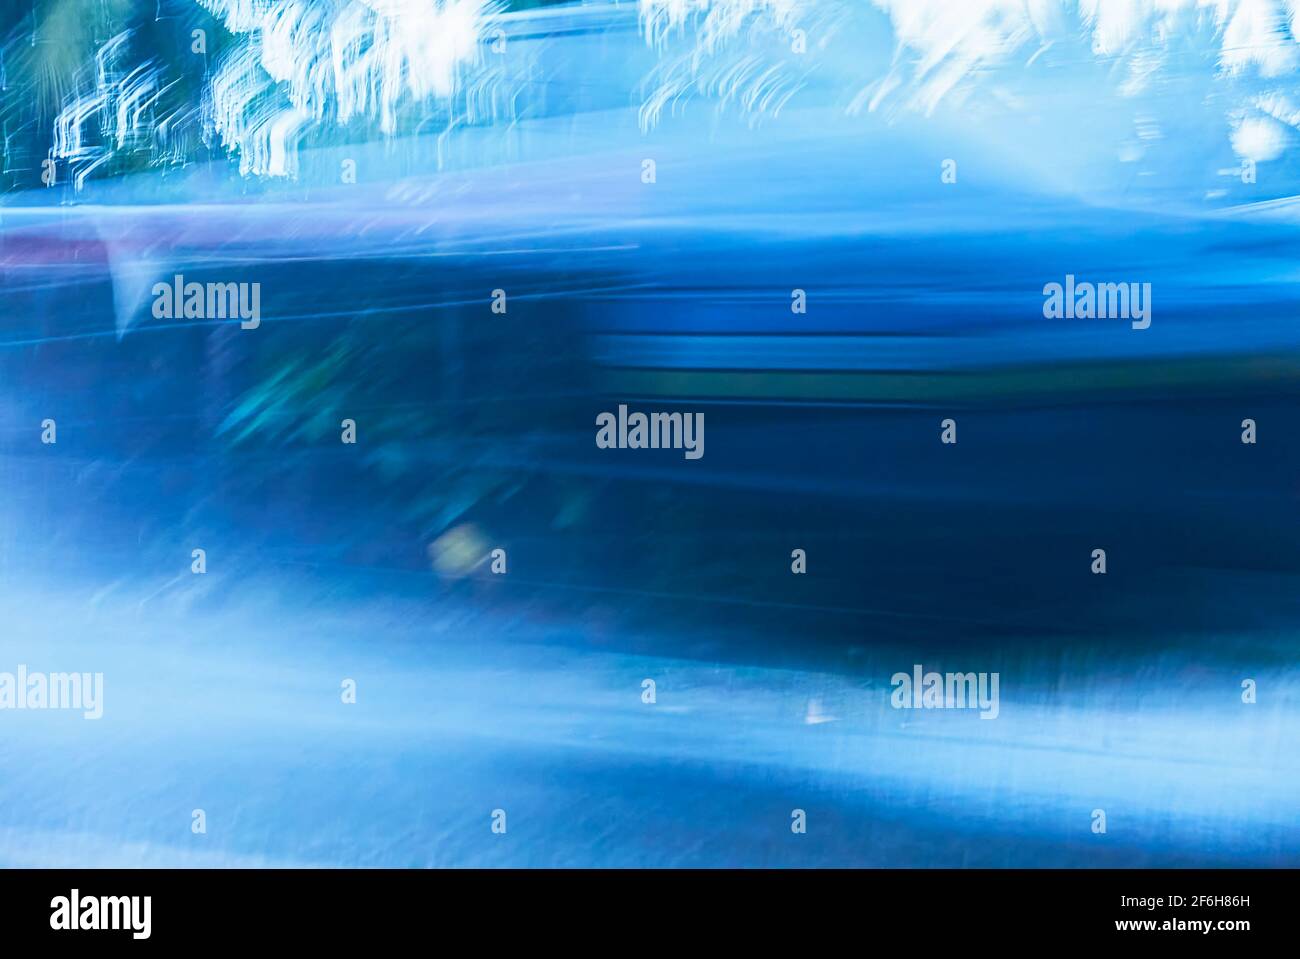 Cold blue colored blurry background with motion lines and white forms of ice crystals Stock Photo